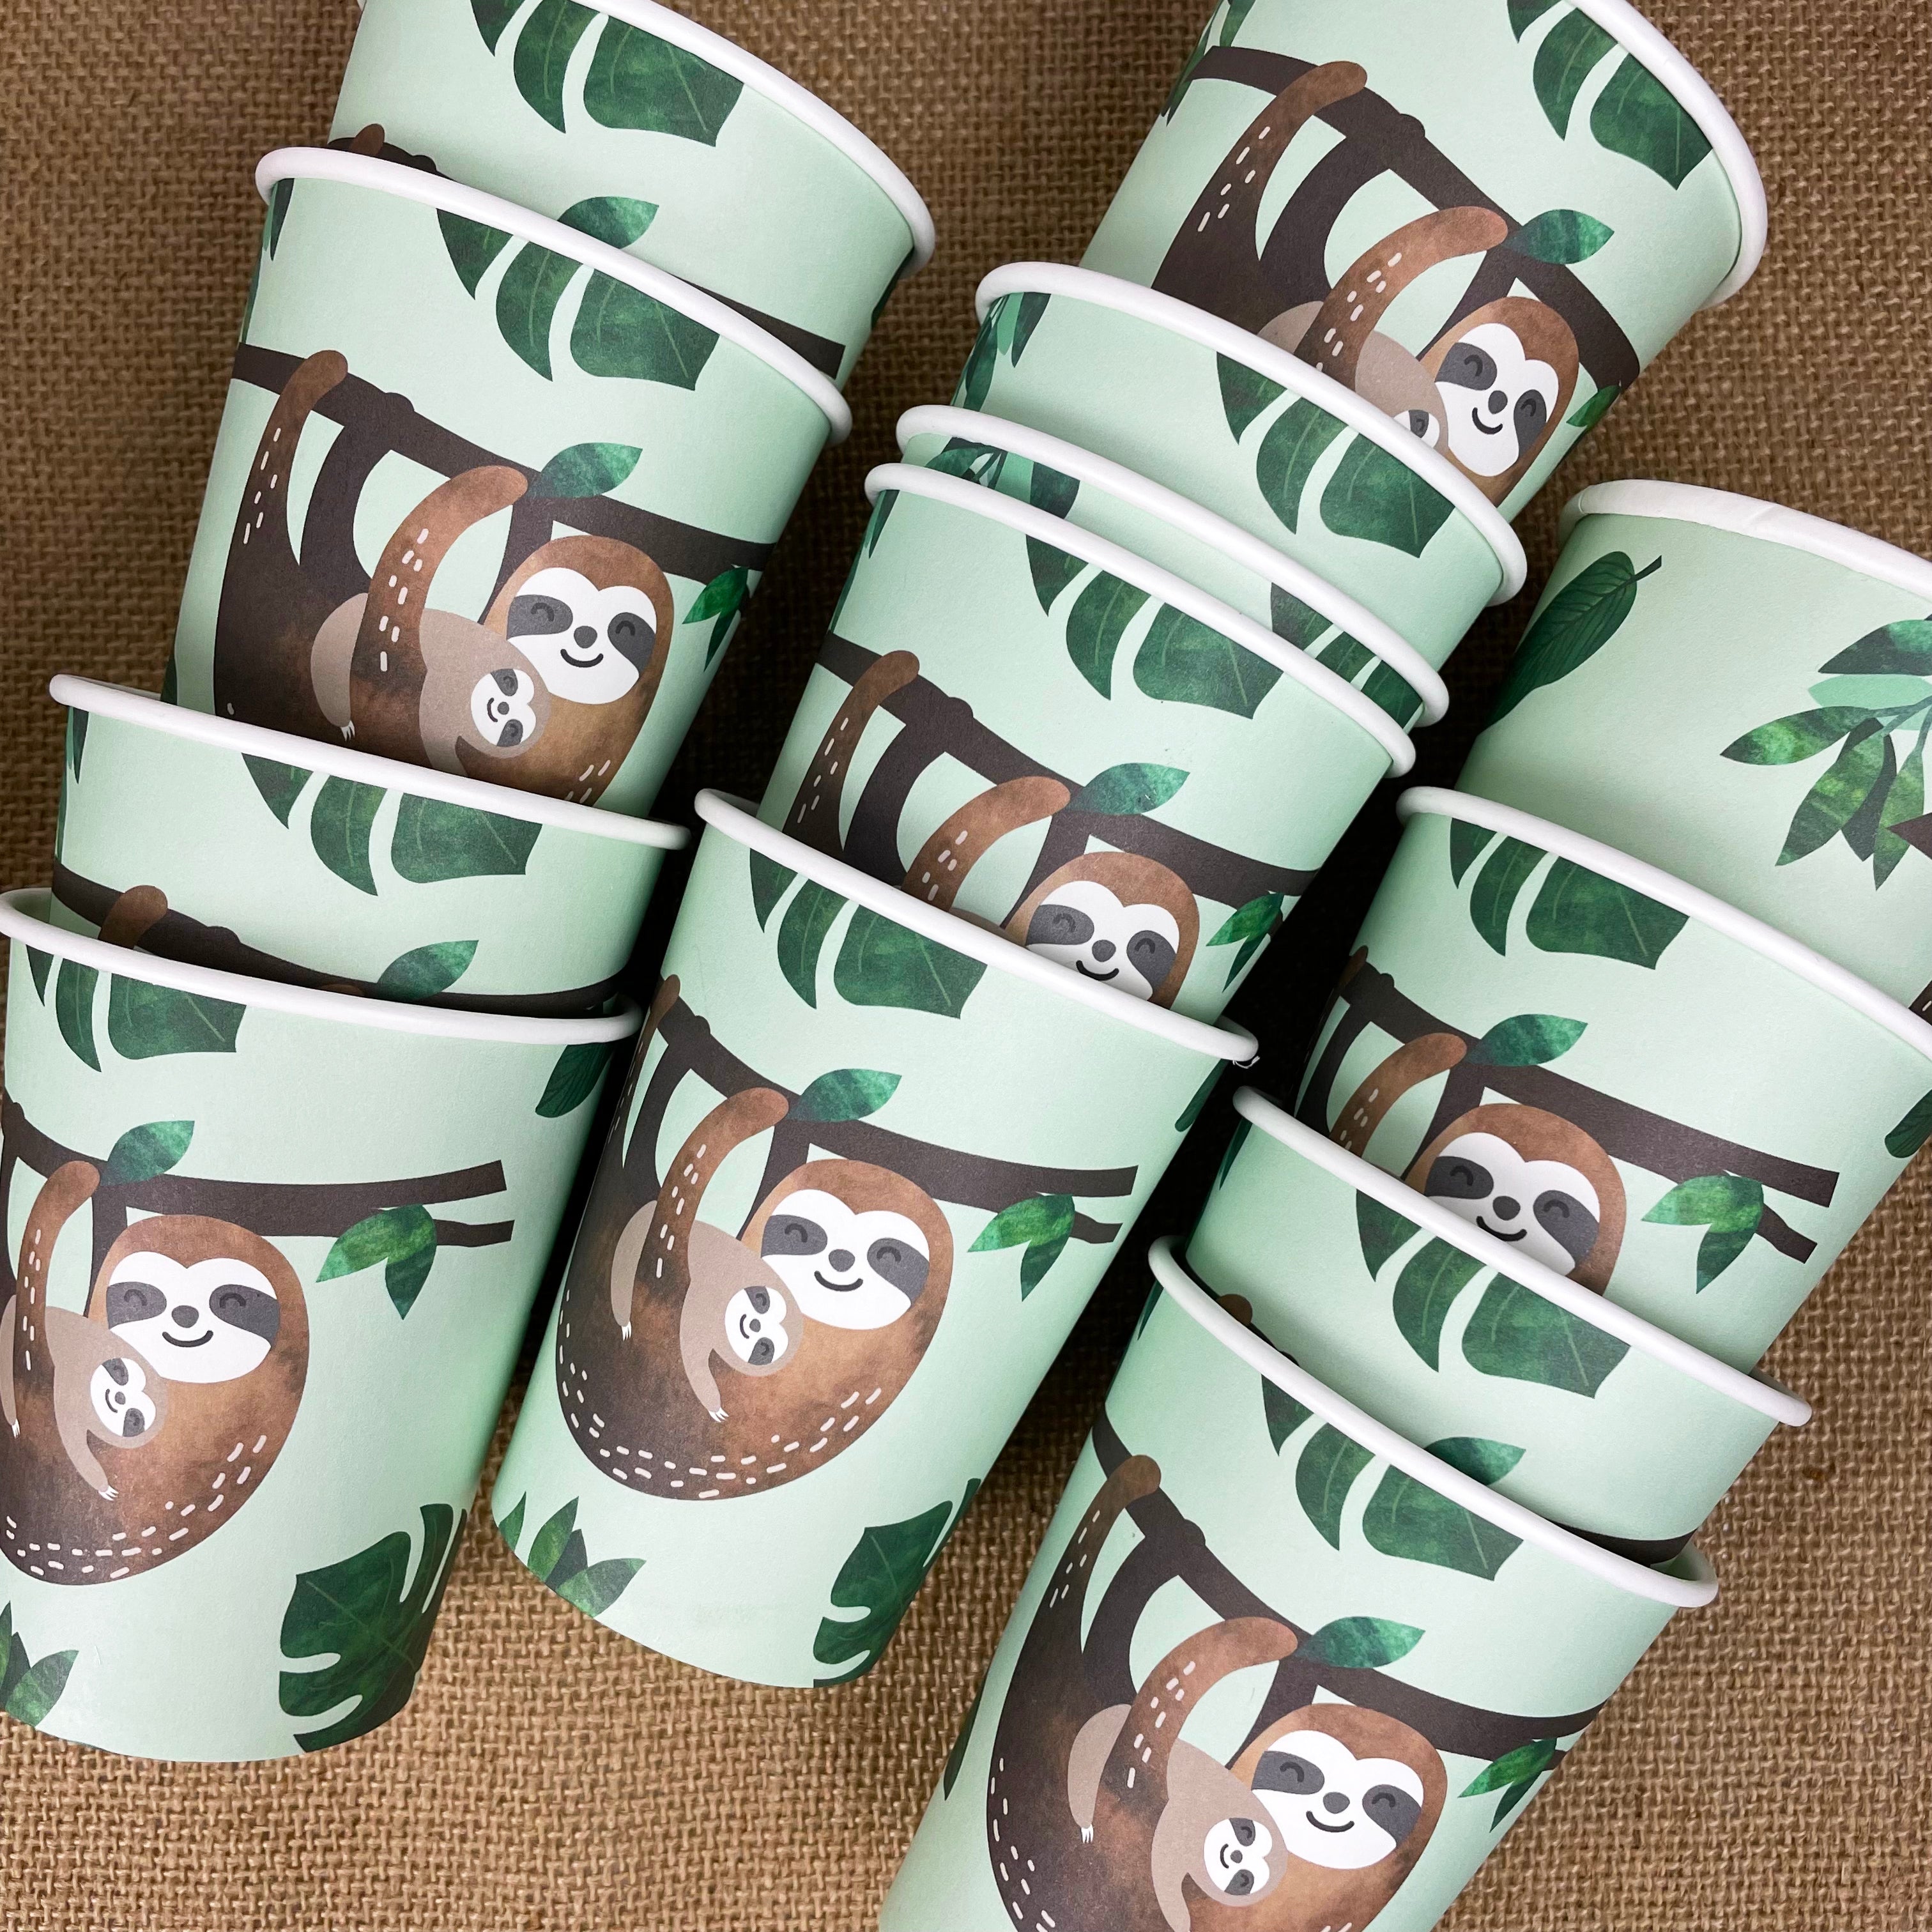 Sloth Cups, 12 Ct